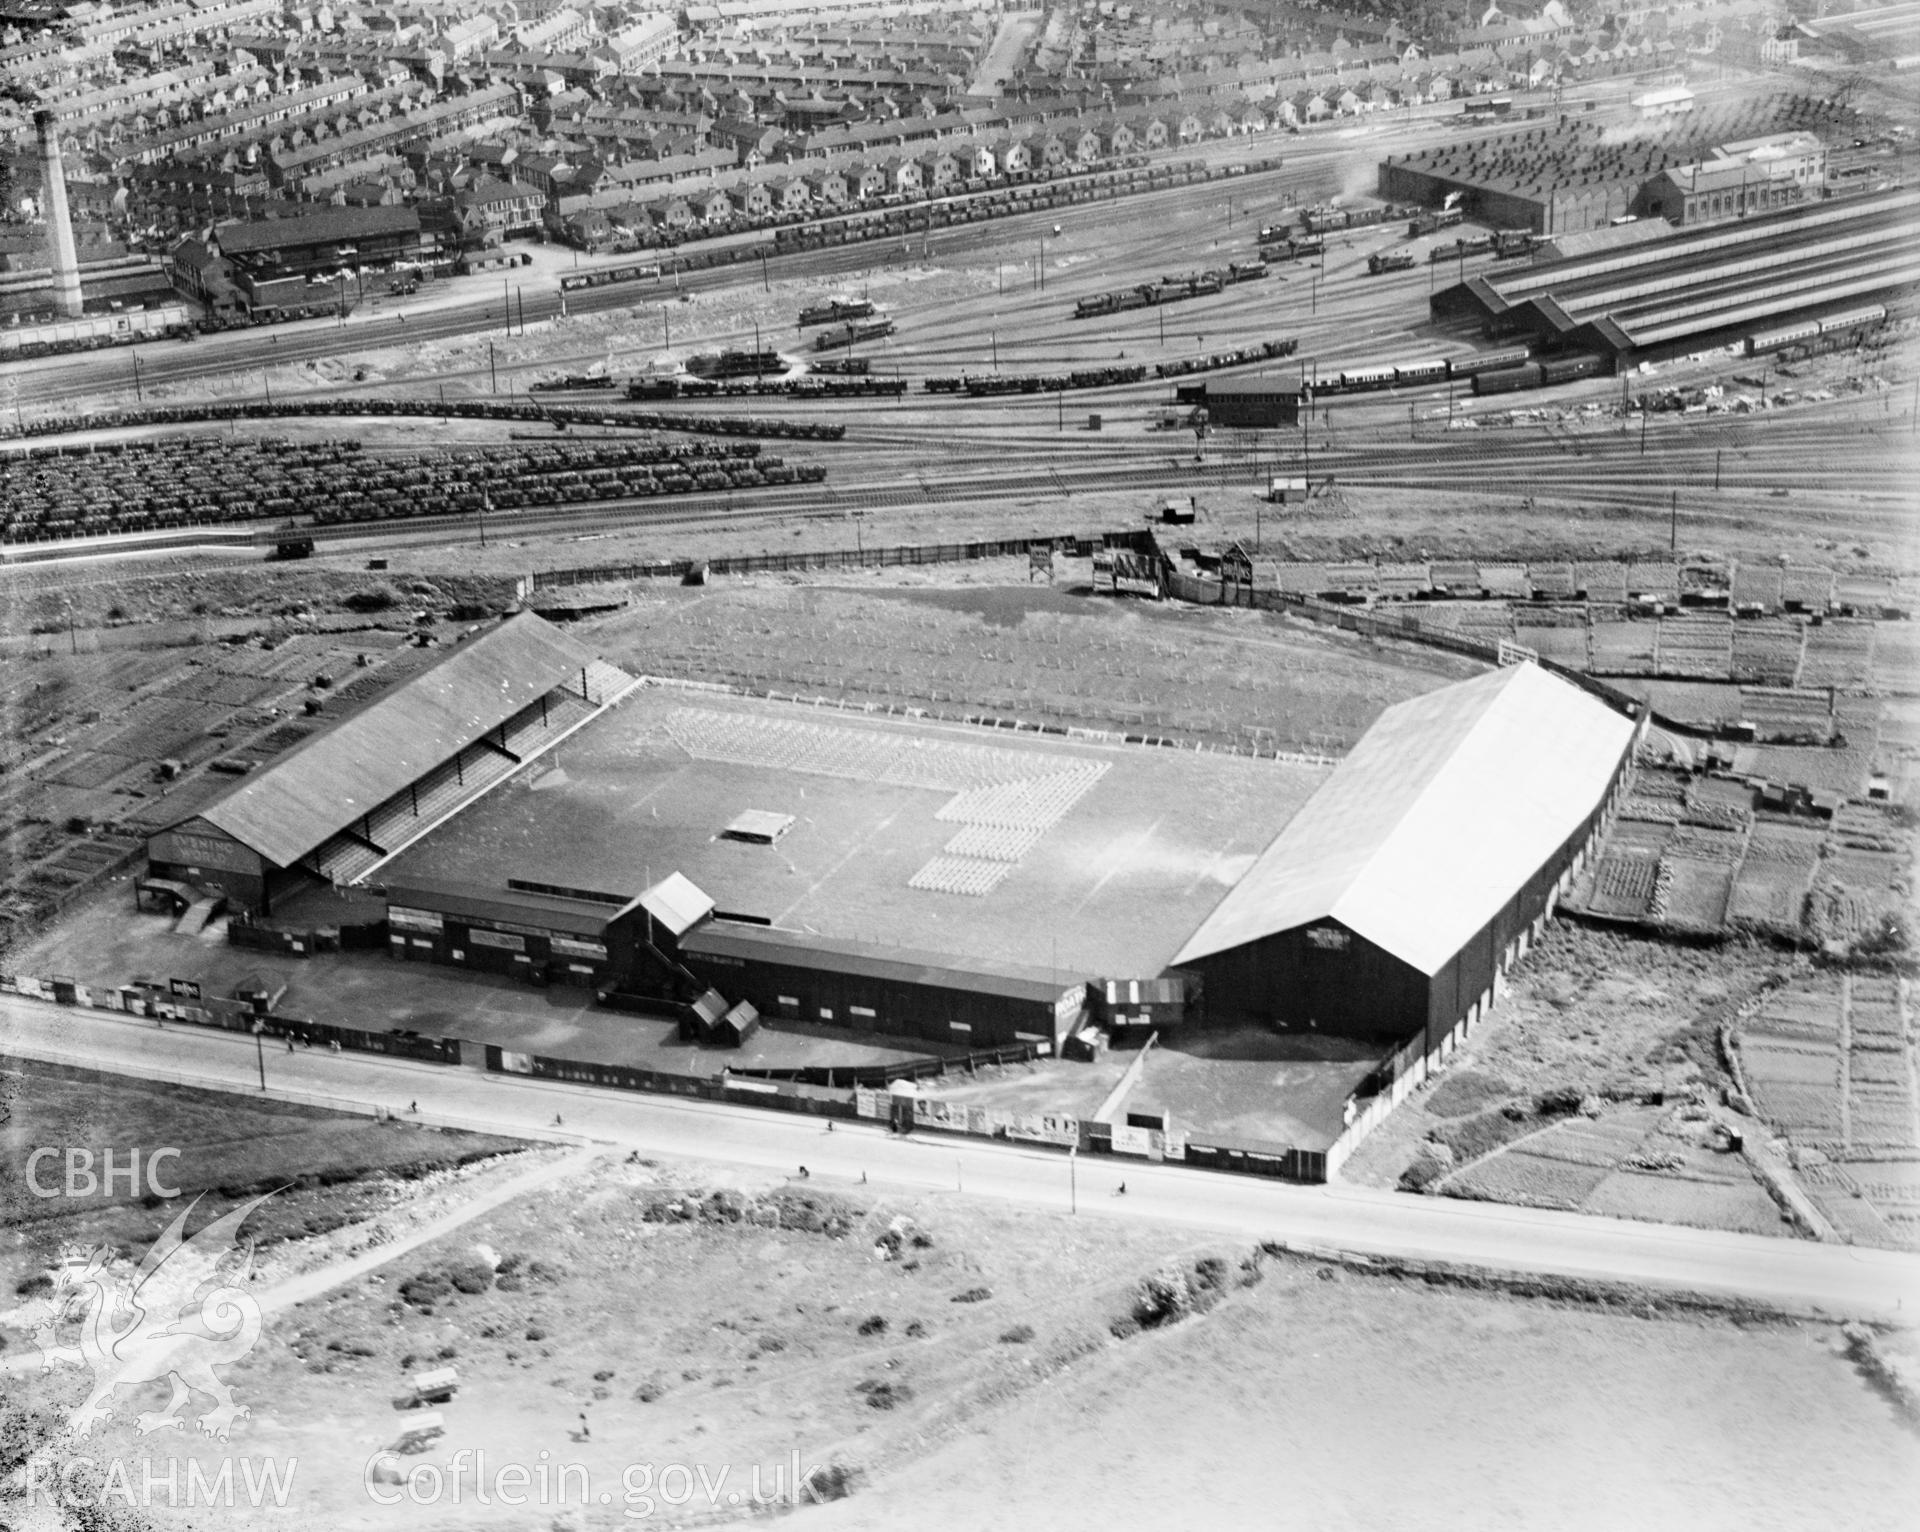 View of Ninian Park football ground showing boxing match, oblique aerial view. 5?x4? black and white glass plate negative.